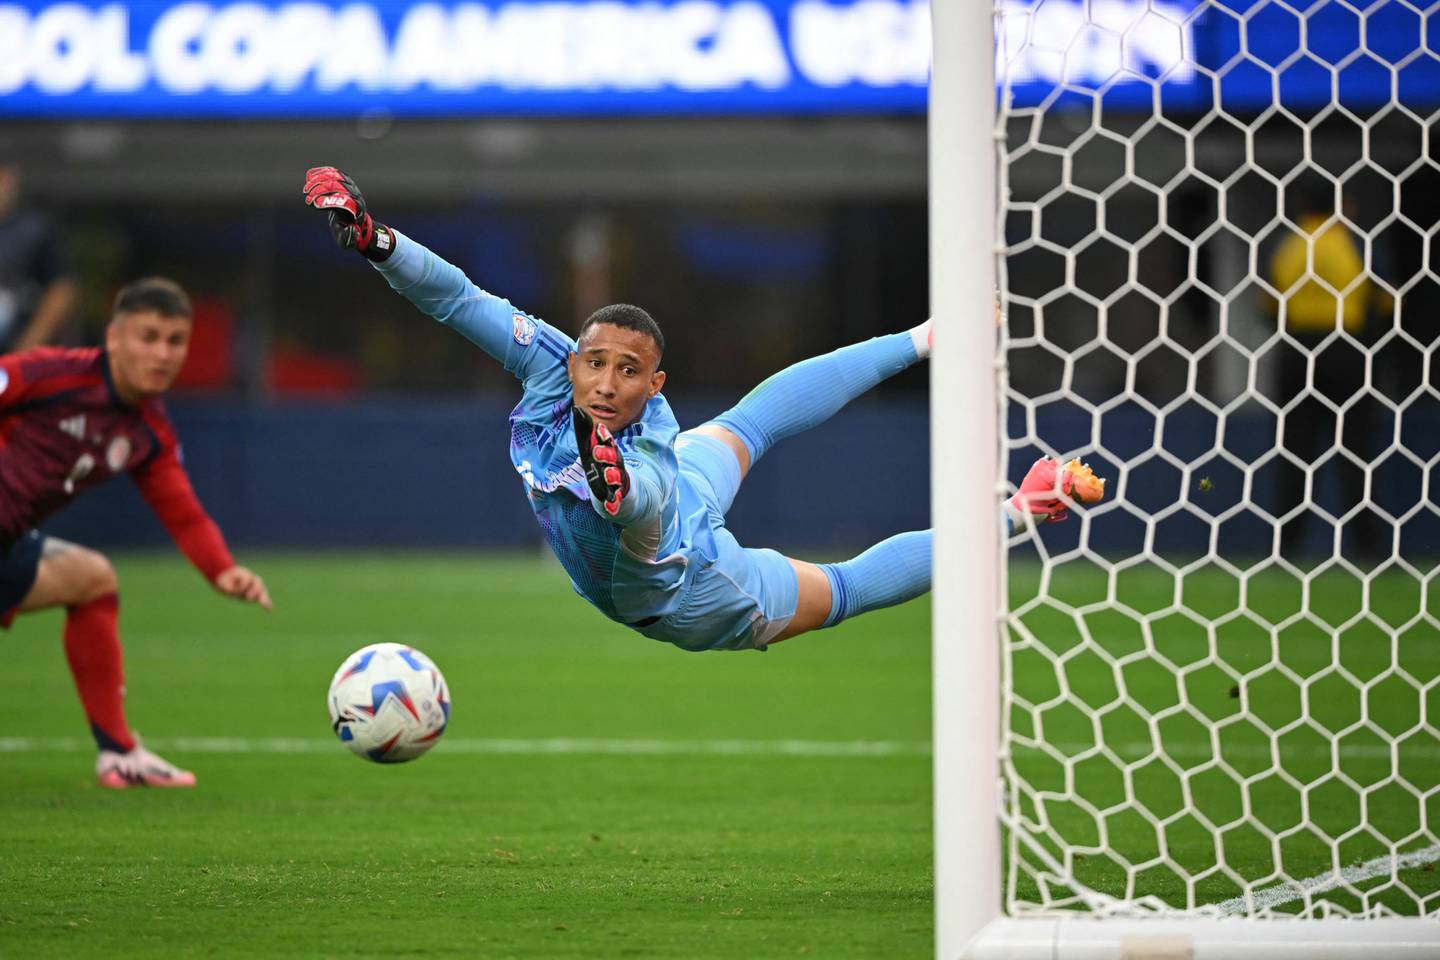 Costa Rica's goalkeeper #23 Patrick Sequeira fails to save the ball during the Conmebol 2024 Copa America tournament group D football match between Brazil and Costa Rica at SoFi Stadium in Inglewood, California on June 24, 2024. (Photo by Patrick T. Fallon / AFP)